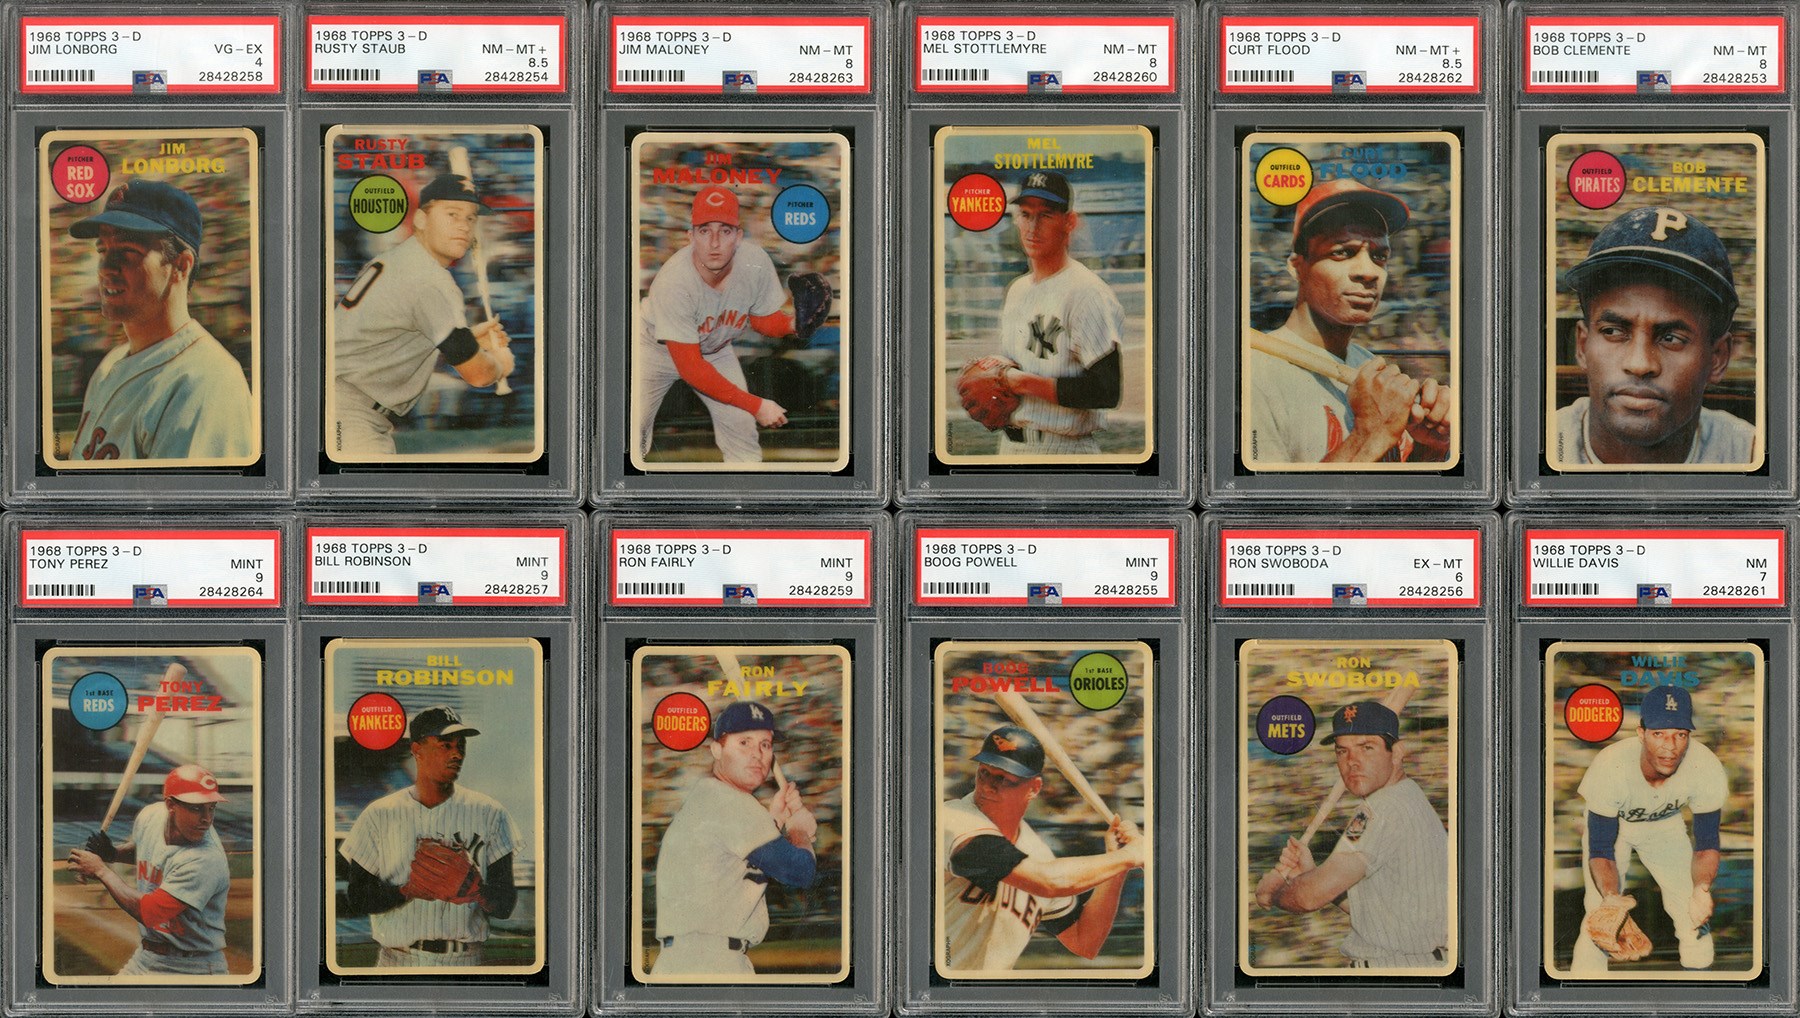 - 1968 Topps 3-D PSA Graded Complete Set of 12 cards with PSA 8 Clemente! - #5 All Time Finest Registry Set